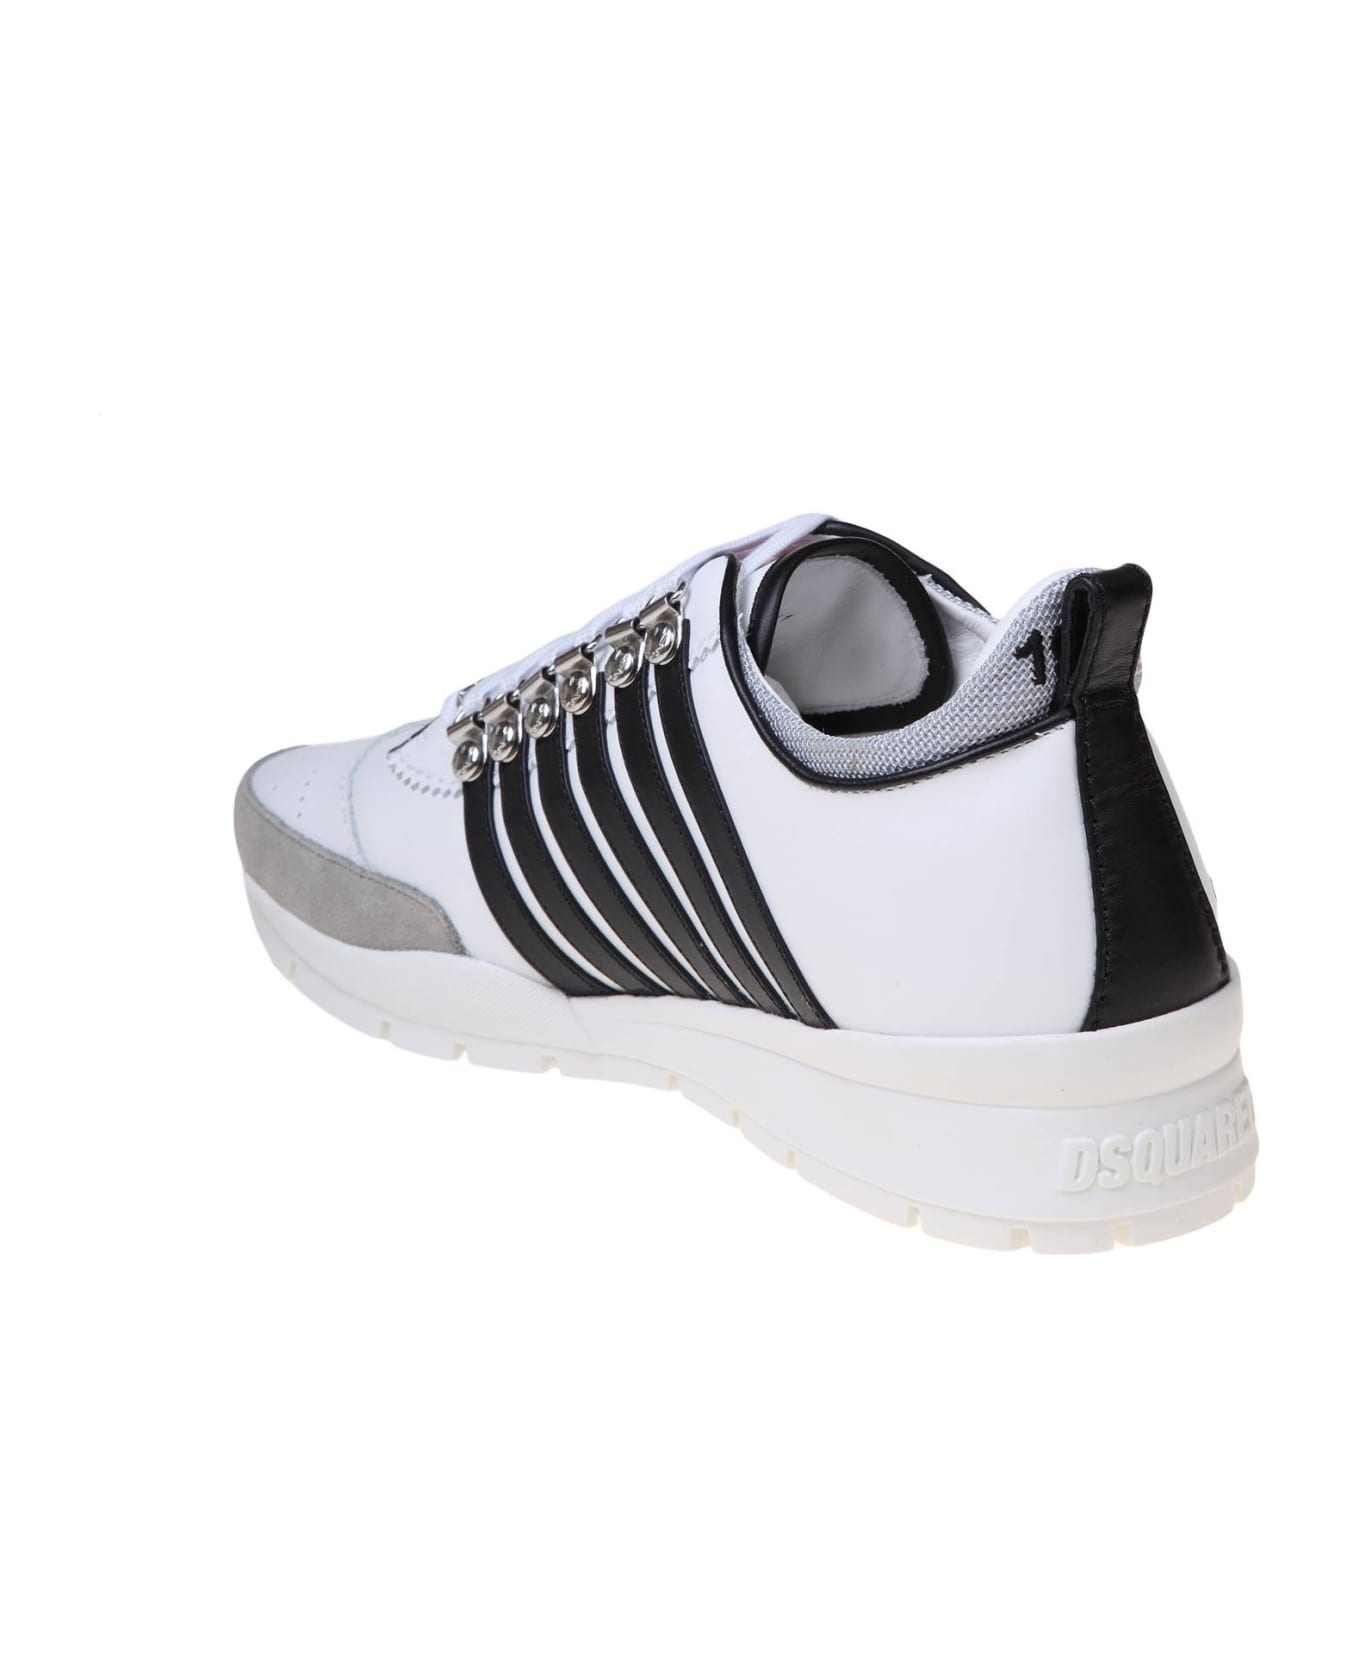 Dsquared2 Legendary Sneakers In Black And White Leather - white/black